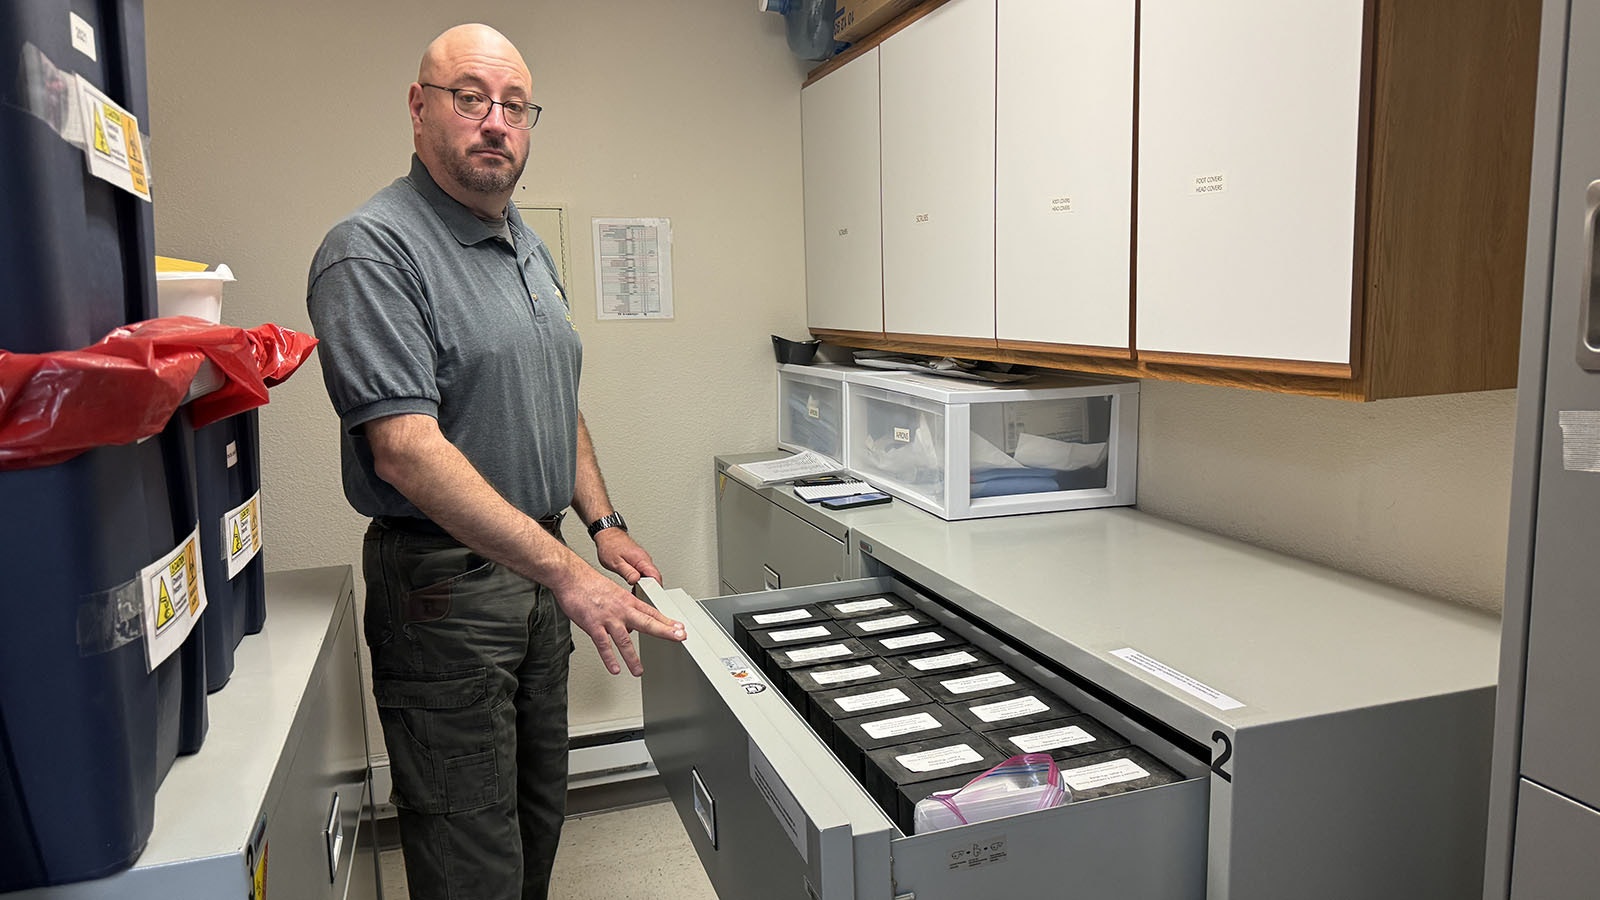 Natrona County Coroner James Whipps keeps the cremated remains of indigent people contained in square, box-shaped urns in a fireproof filing cabinet in one of his offices until he can find next-of-kin.